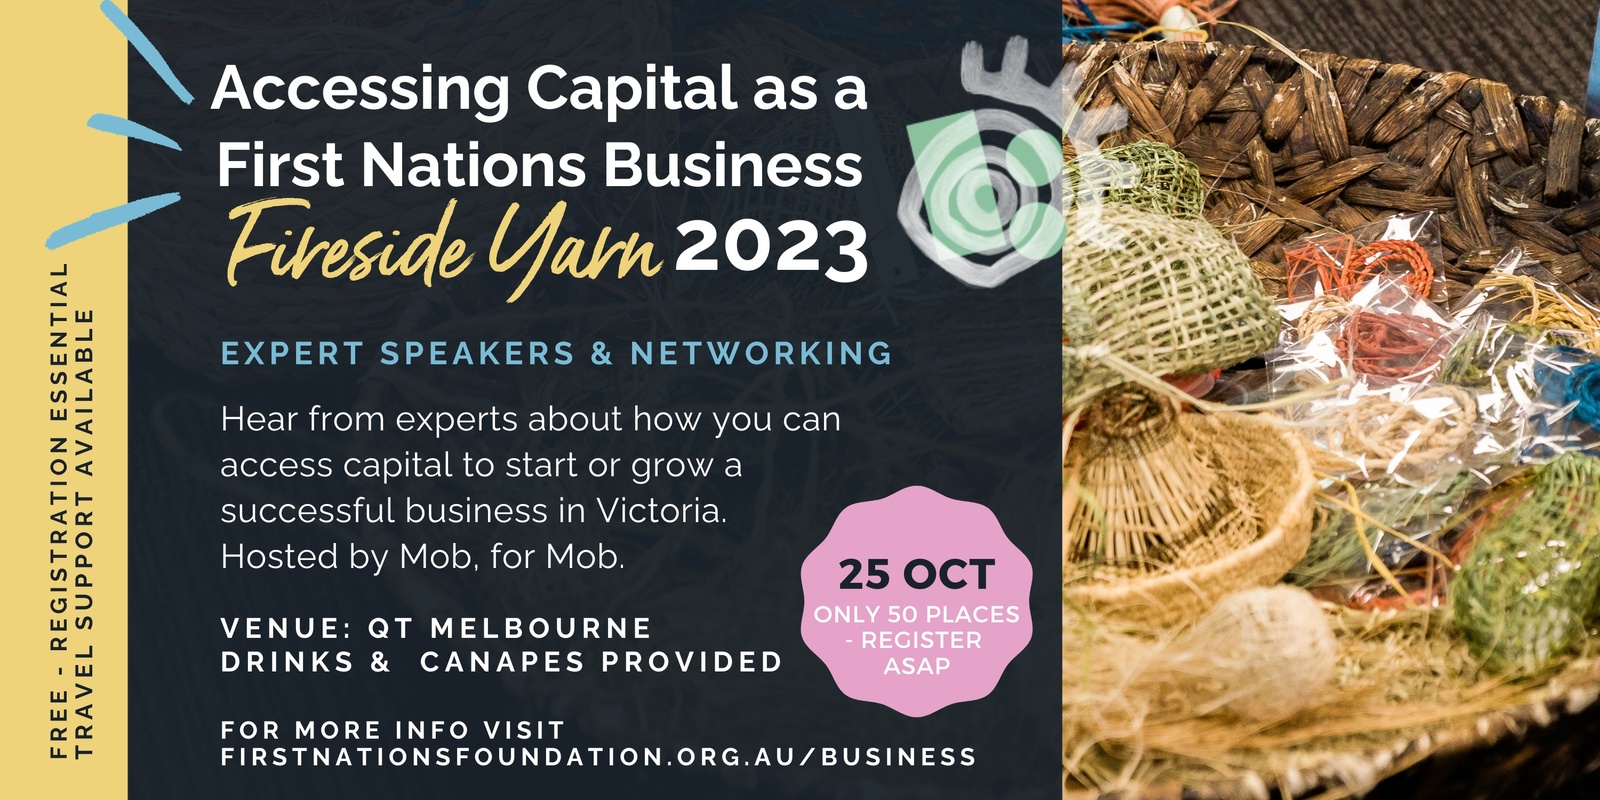 Banner image for Accessing Capital as a First Nations Business Fireside Yarn 2023